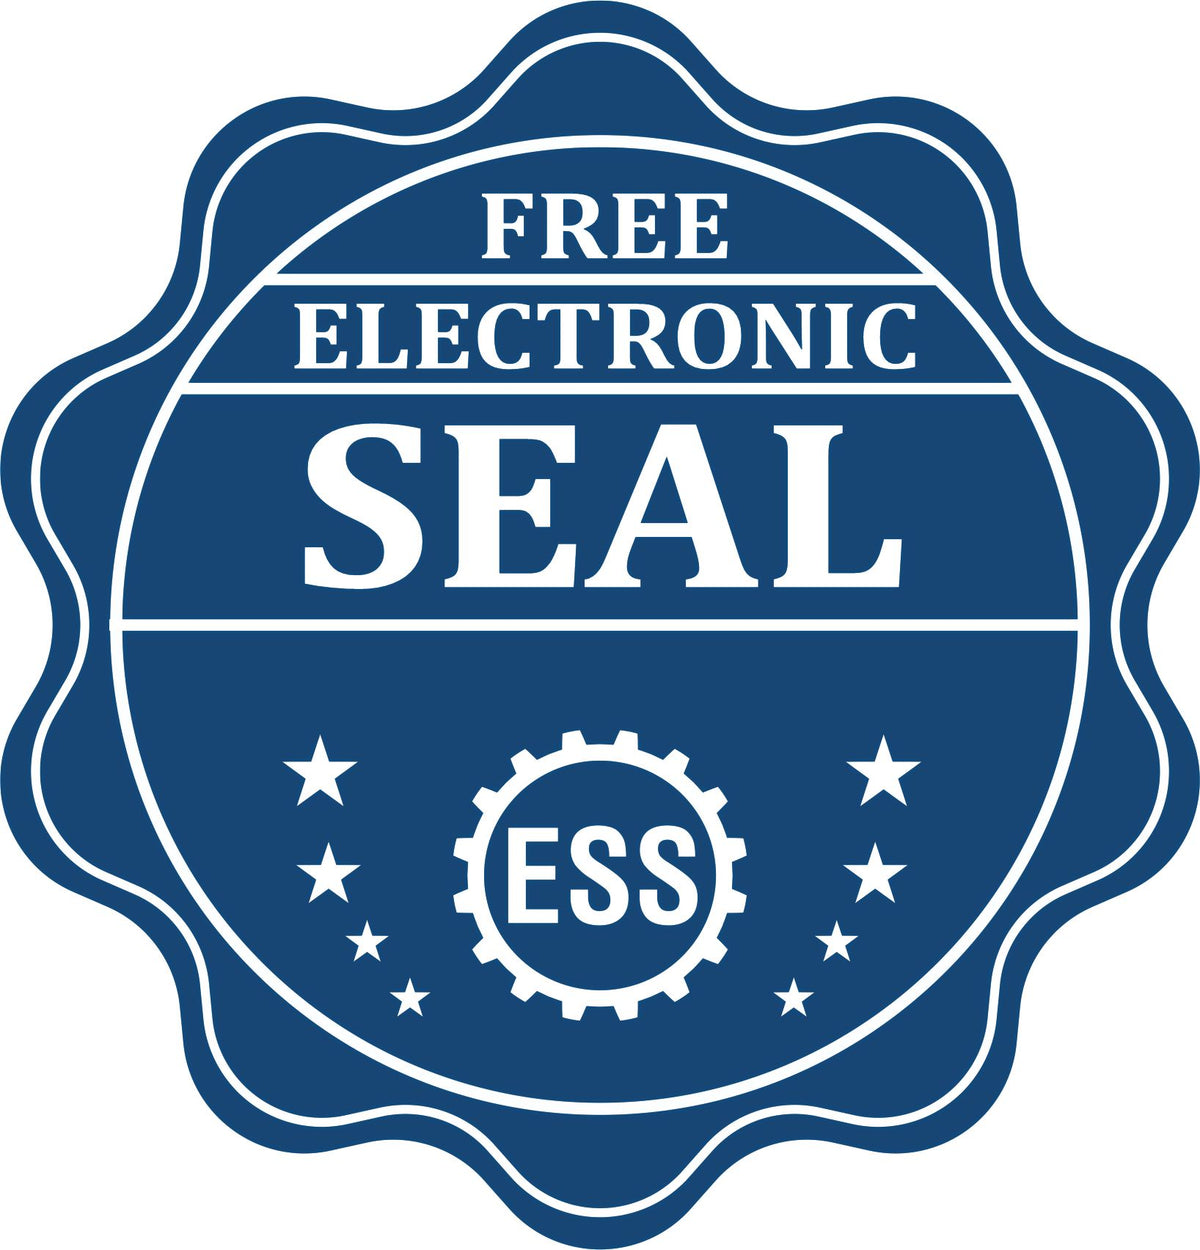 A badge showing a free electronic seal for the Hybrid Tennessee Landscape Architect Seal with stars and the ESS gear on the emblem.